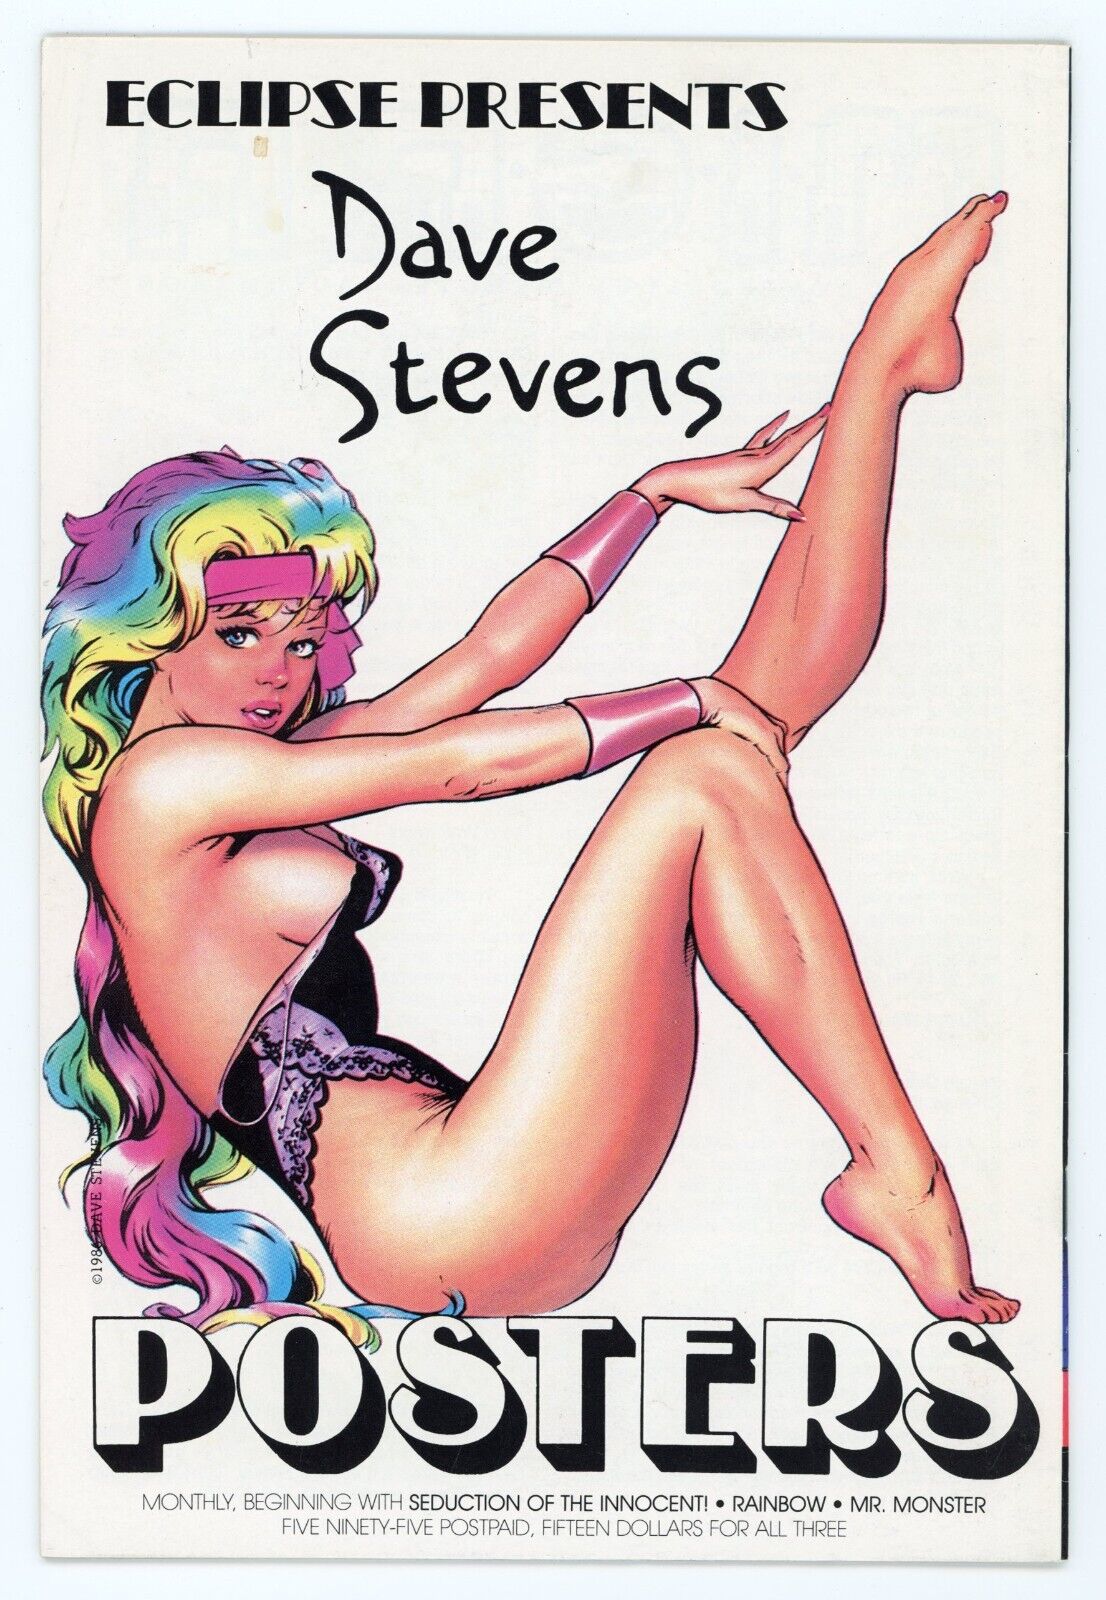 Eclipse Presents DAVE STEVENS Back Comic Cover AD (FN 6.0) Rainbow DNAgents GGA